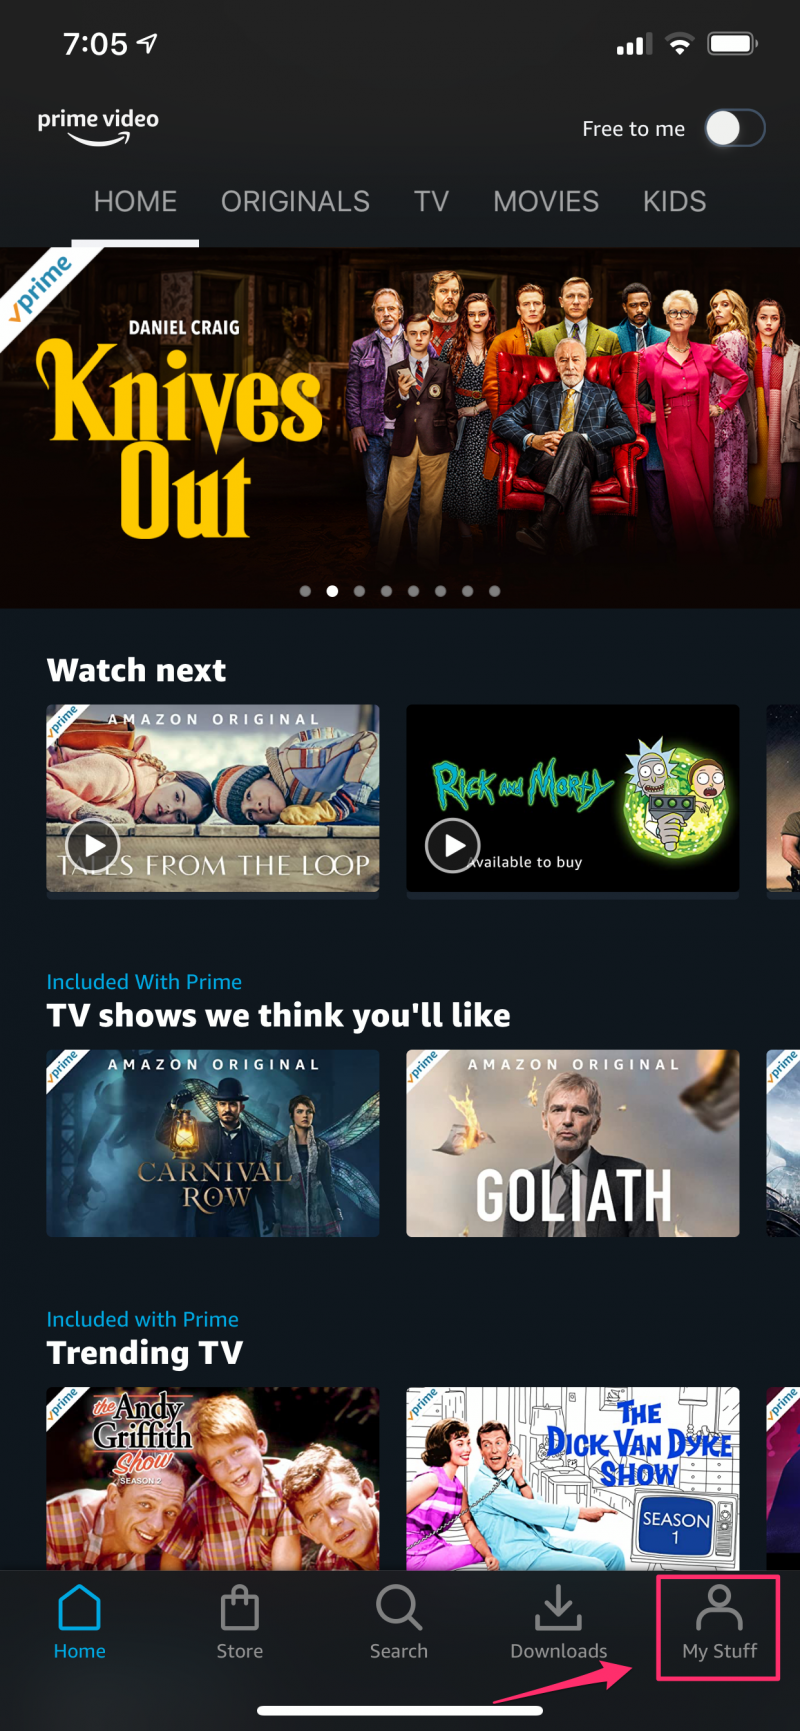 How to see Prime Video purchases 1